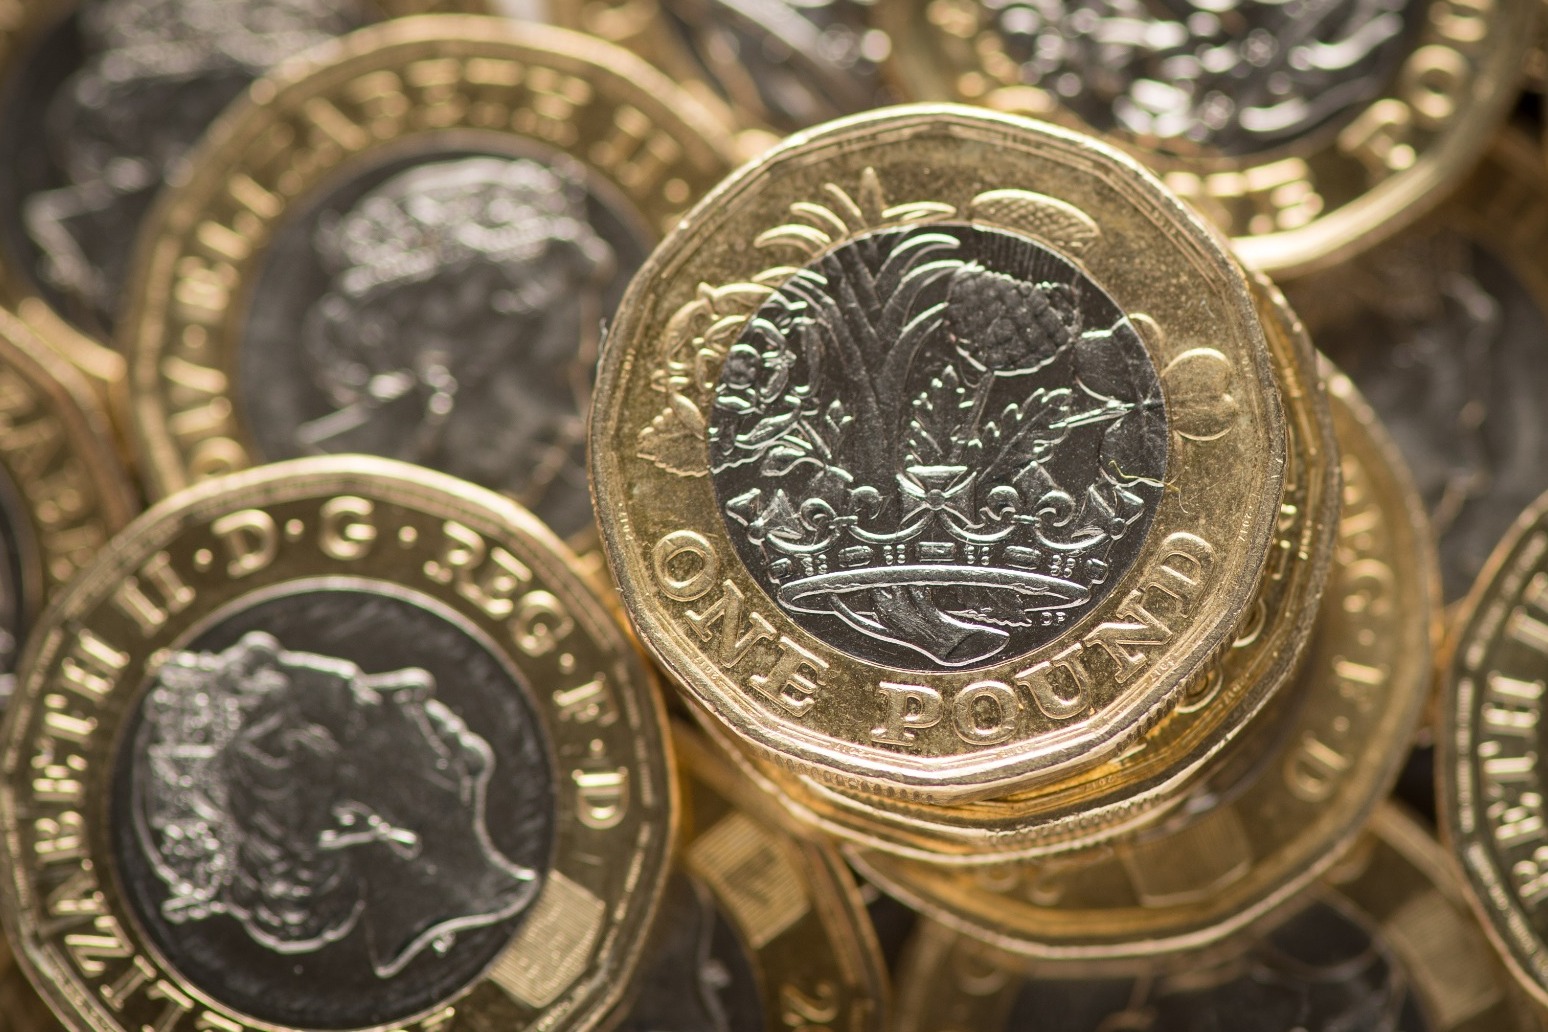 Changes to national living wage age bands will have ‘major impact’ – research 